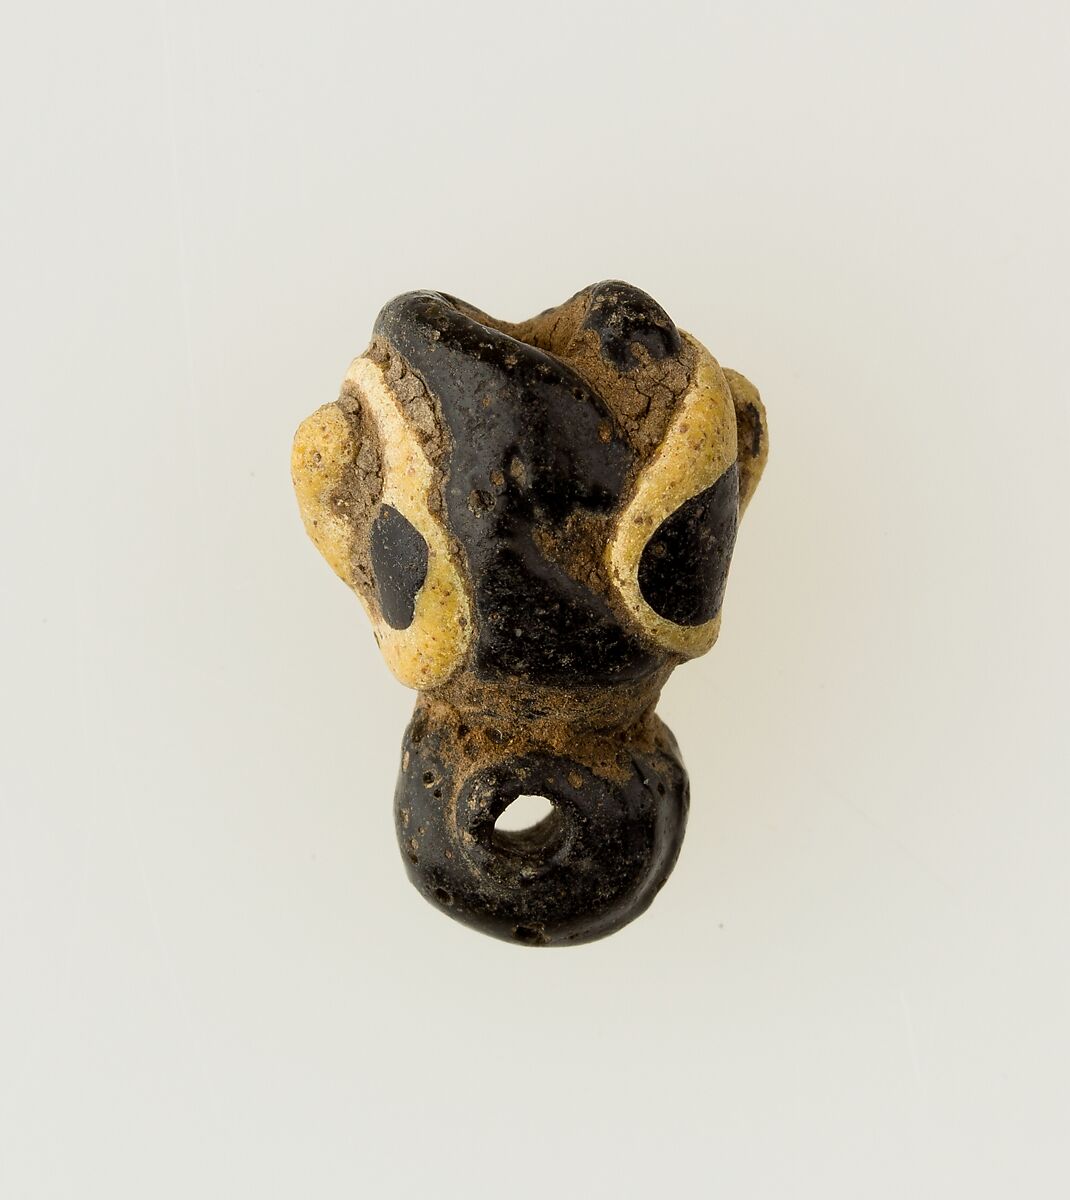 Amulet in form of human face, Glass 